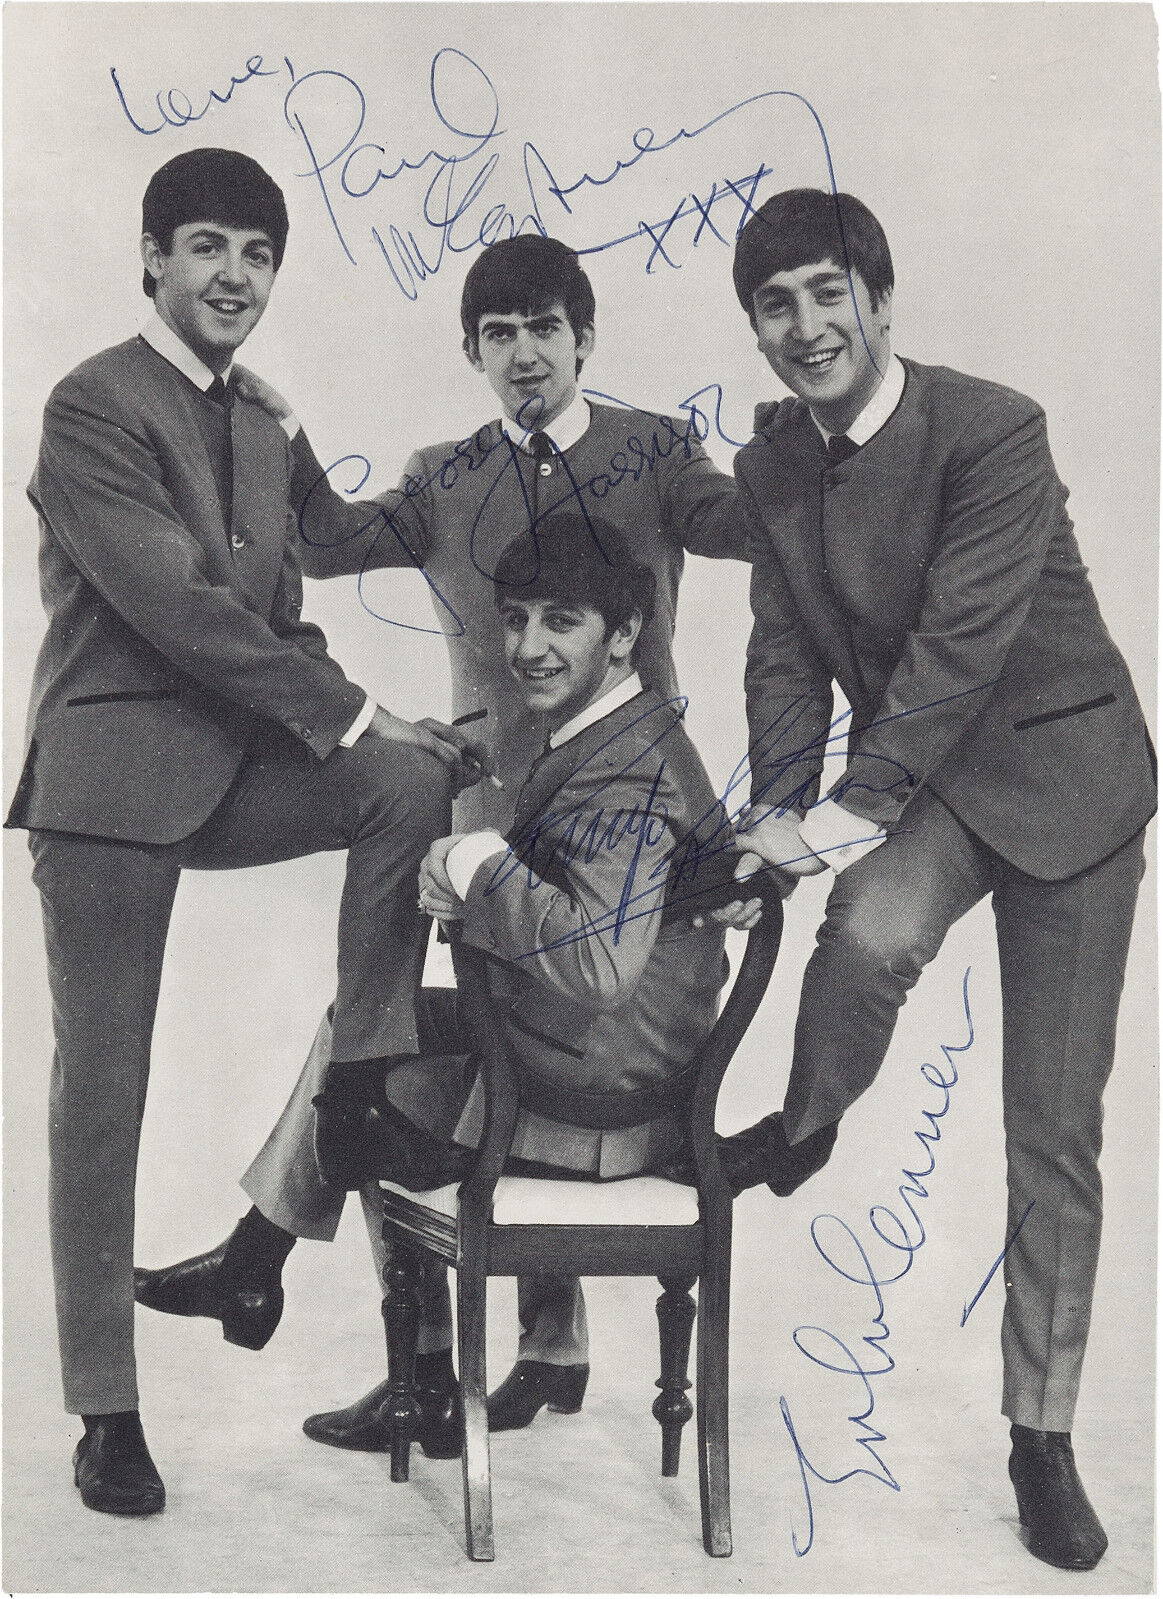 THE BEATLES - Signed Photo Poster paintinggraph - Pop / Rock Star Band / Musicians - preprint